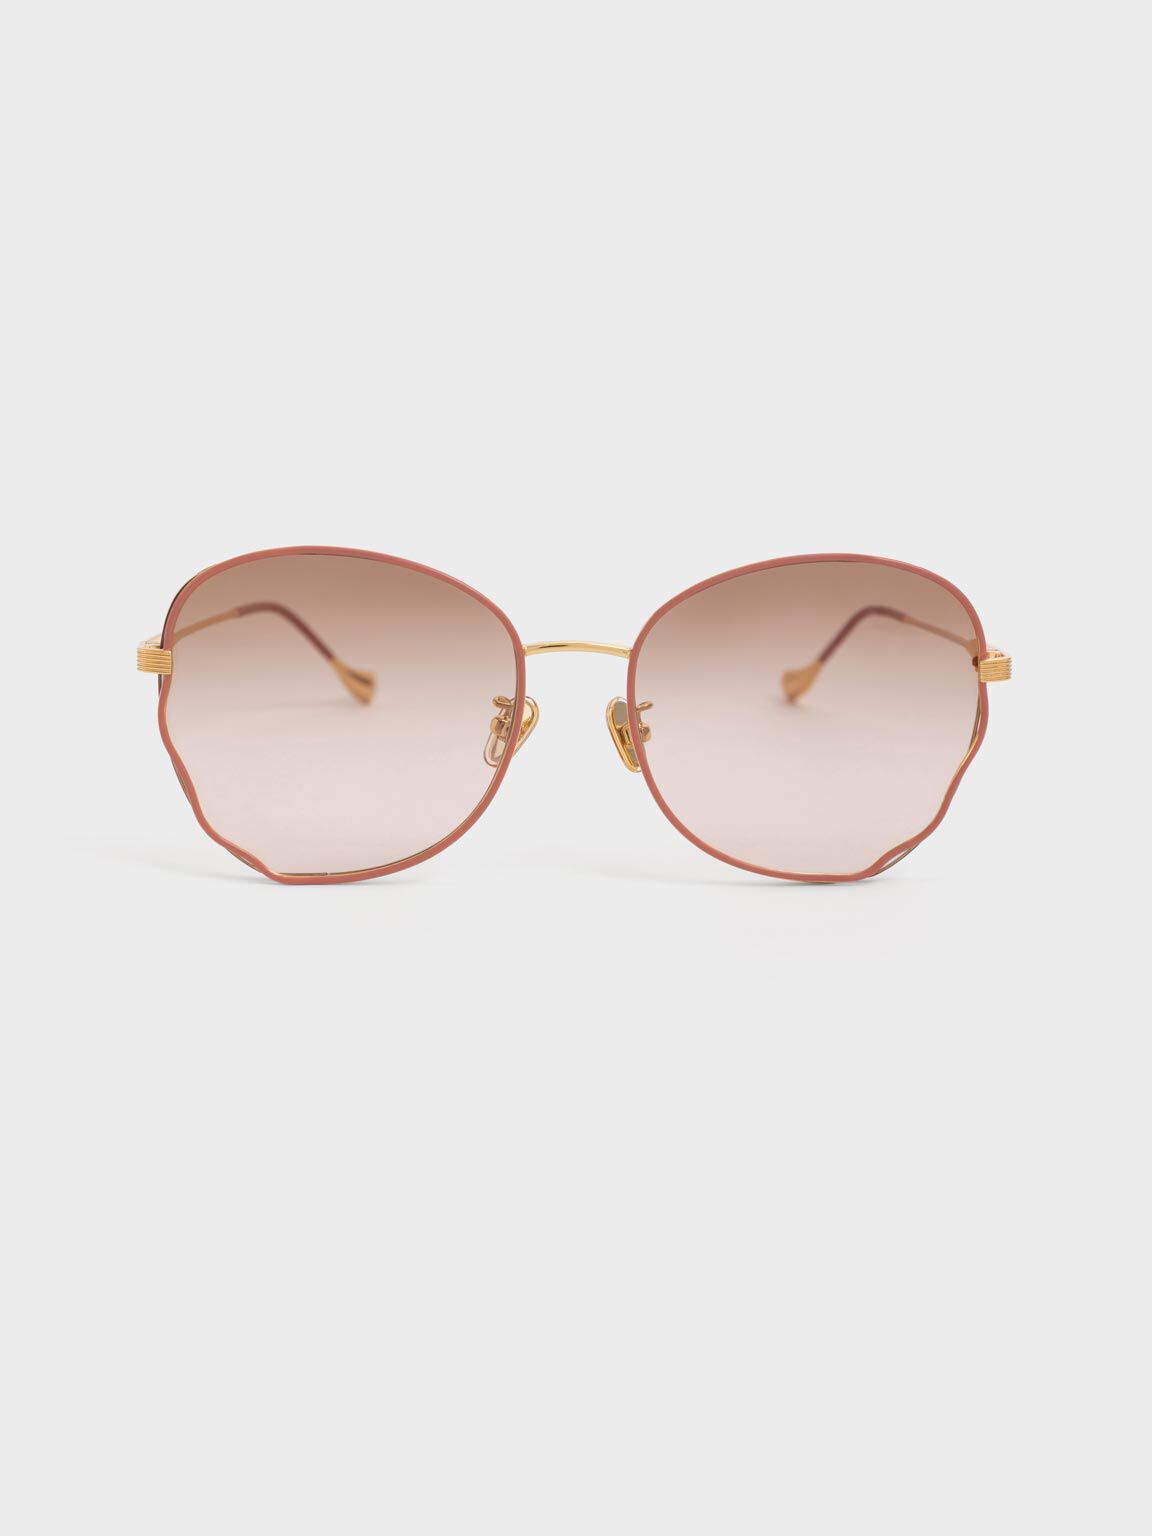 Wavy Frame Butterfly Sunglasses, Pink, hi-res